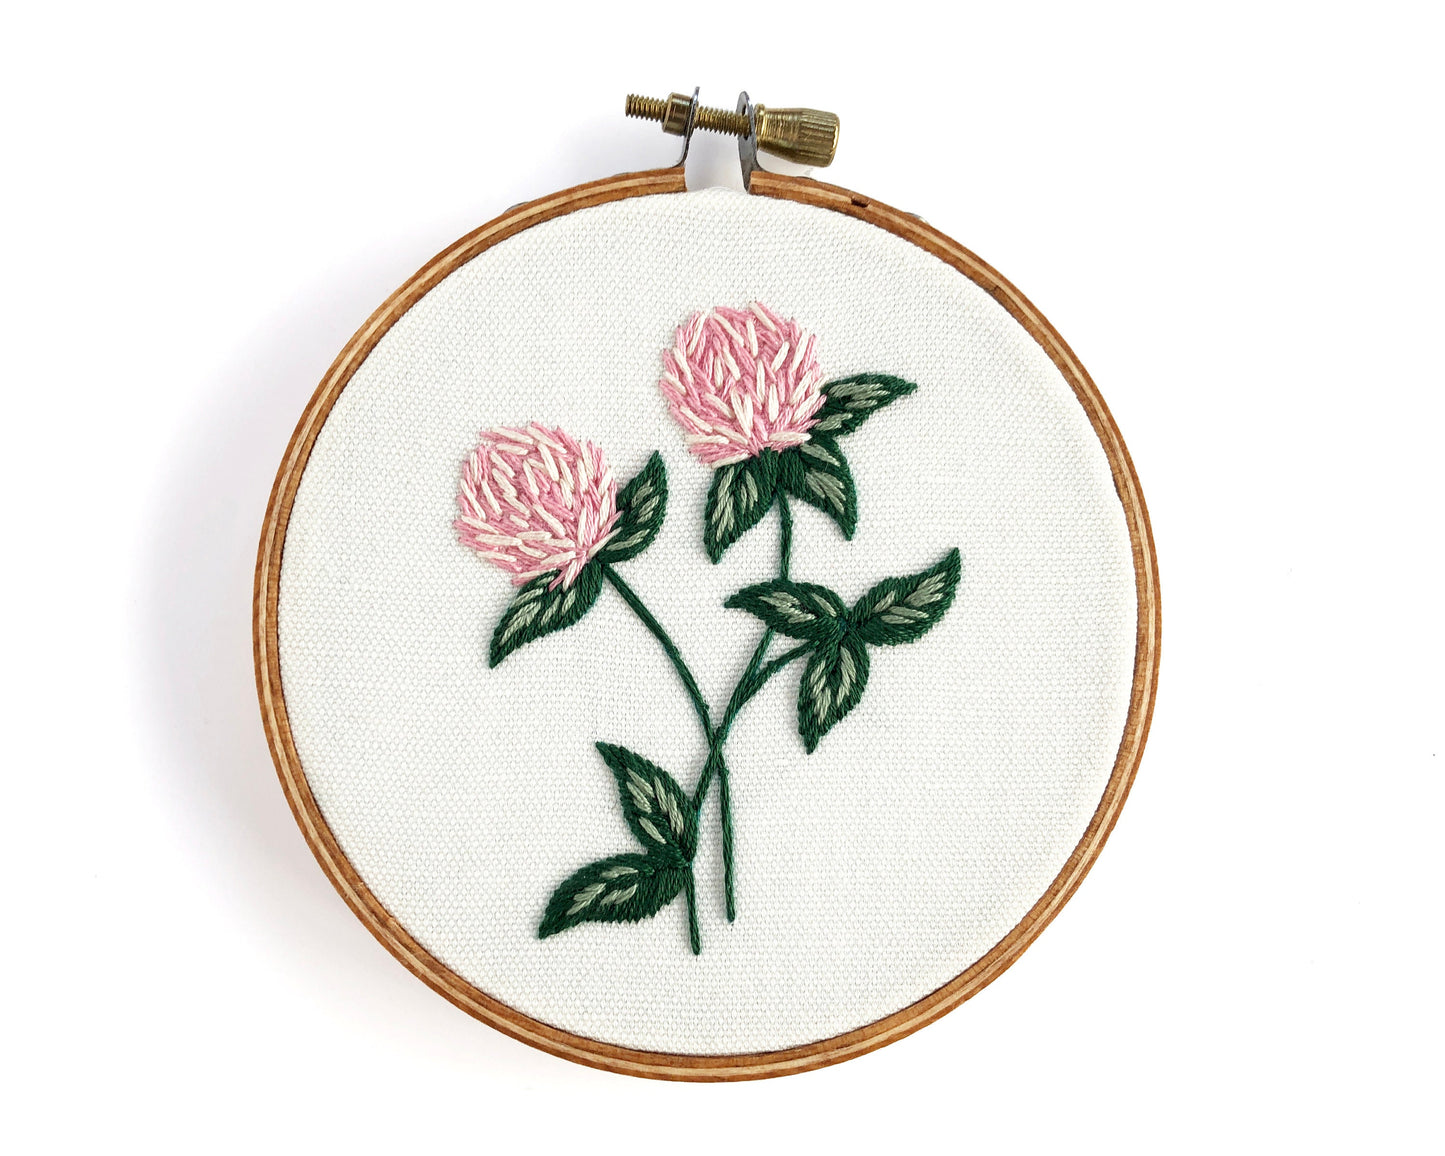 Mini Wildflower Kit, Embroidery Kit, DIY Craft, Botanical Embroidery, Beginner embroidery pattern, Wildflower Embroidery, Clover embroidery